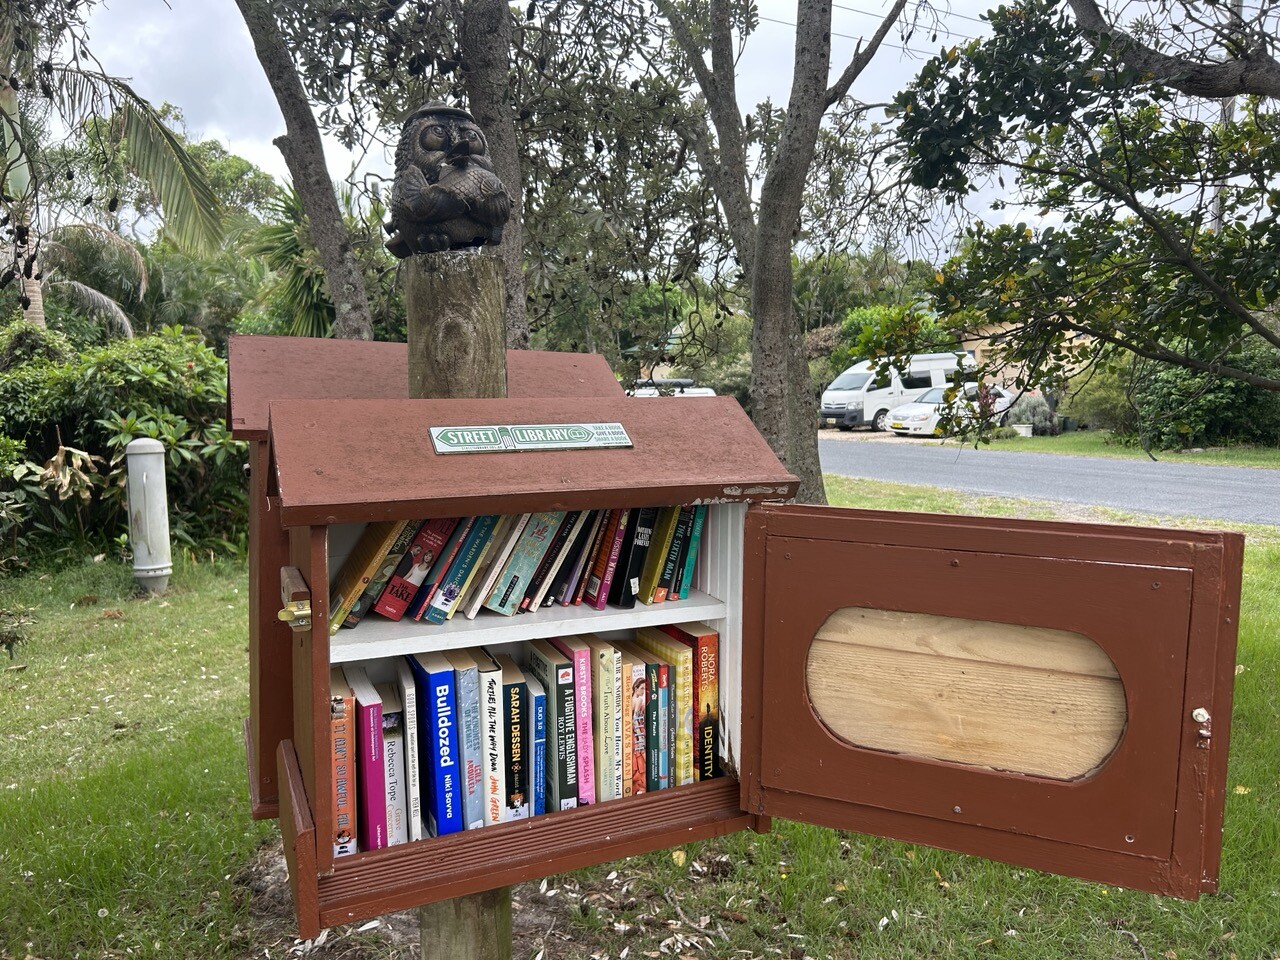 A little Street, Library, a sort of nesting box filled with literature, made out of timber resembling a cottage of some sort in a long foot part in suburbia